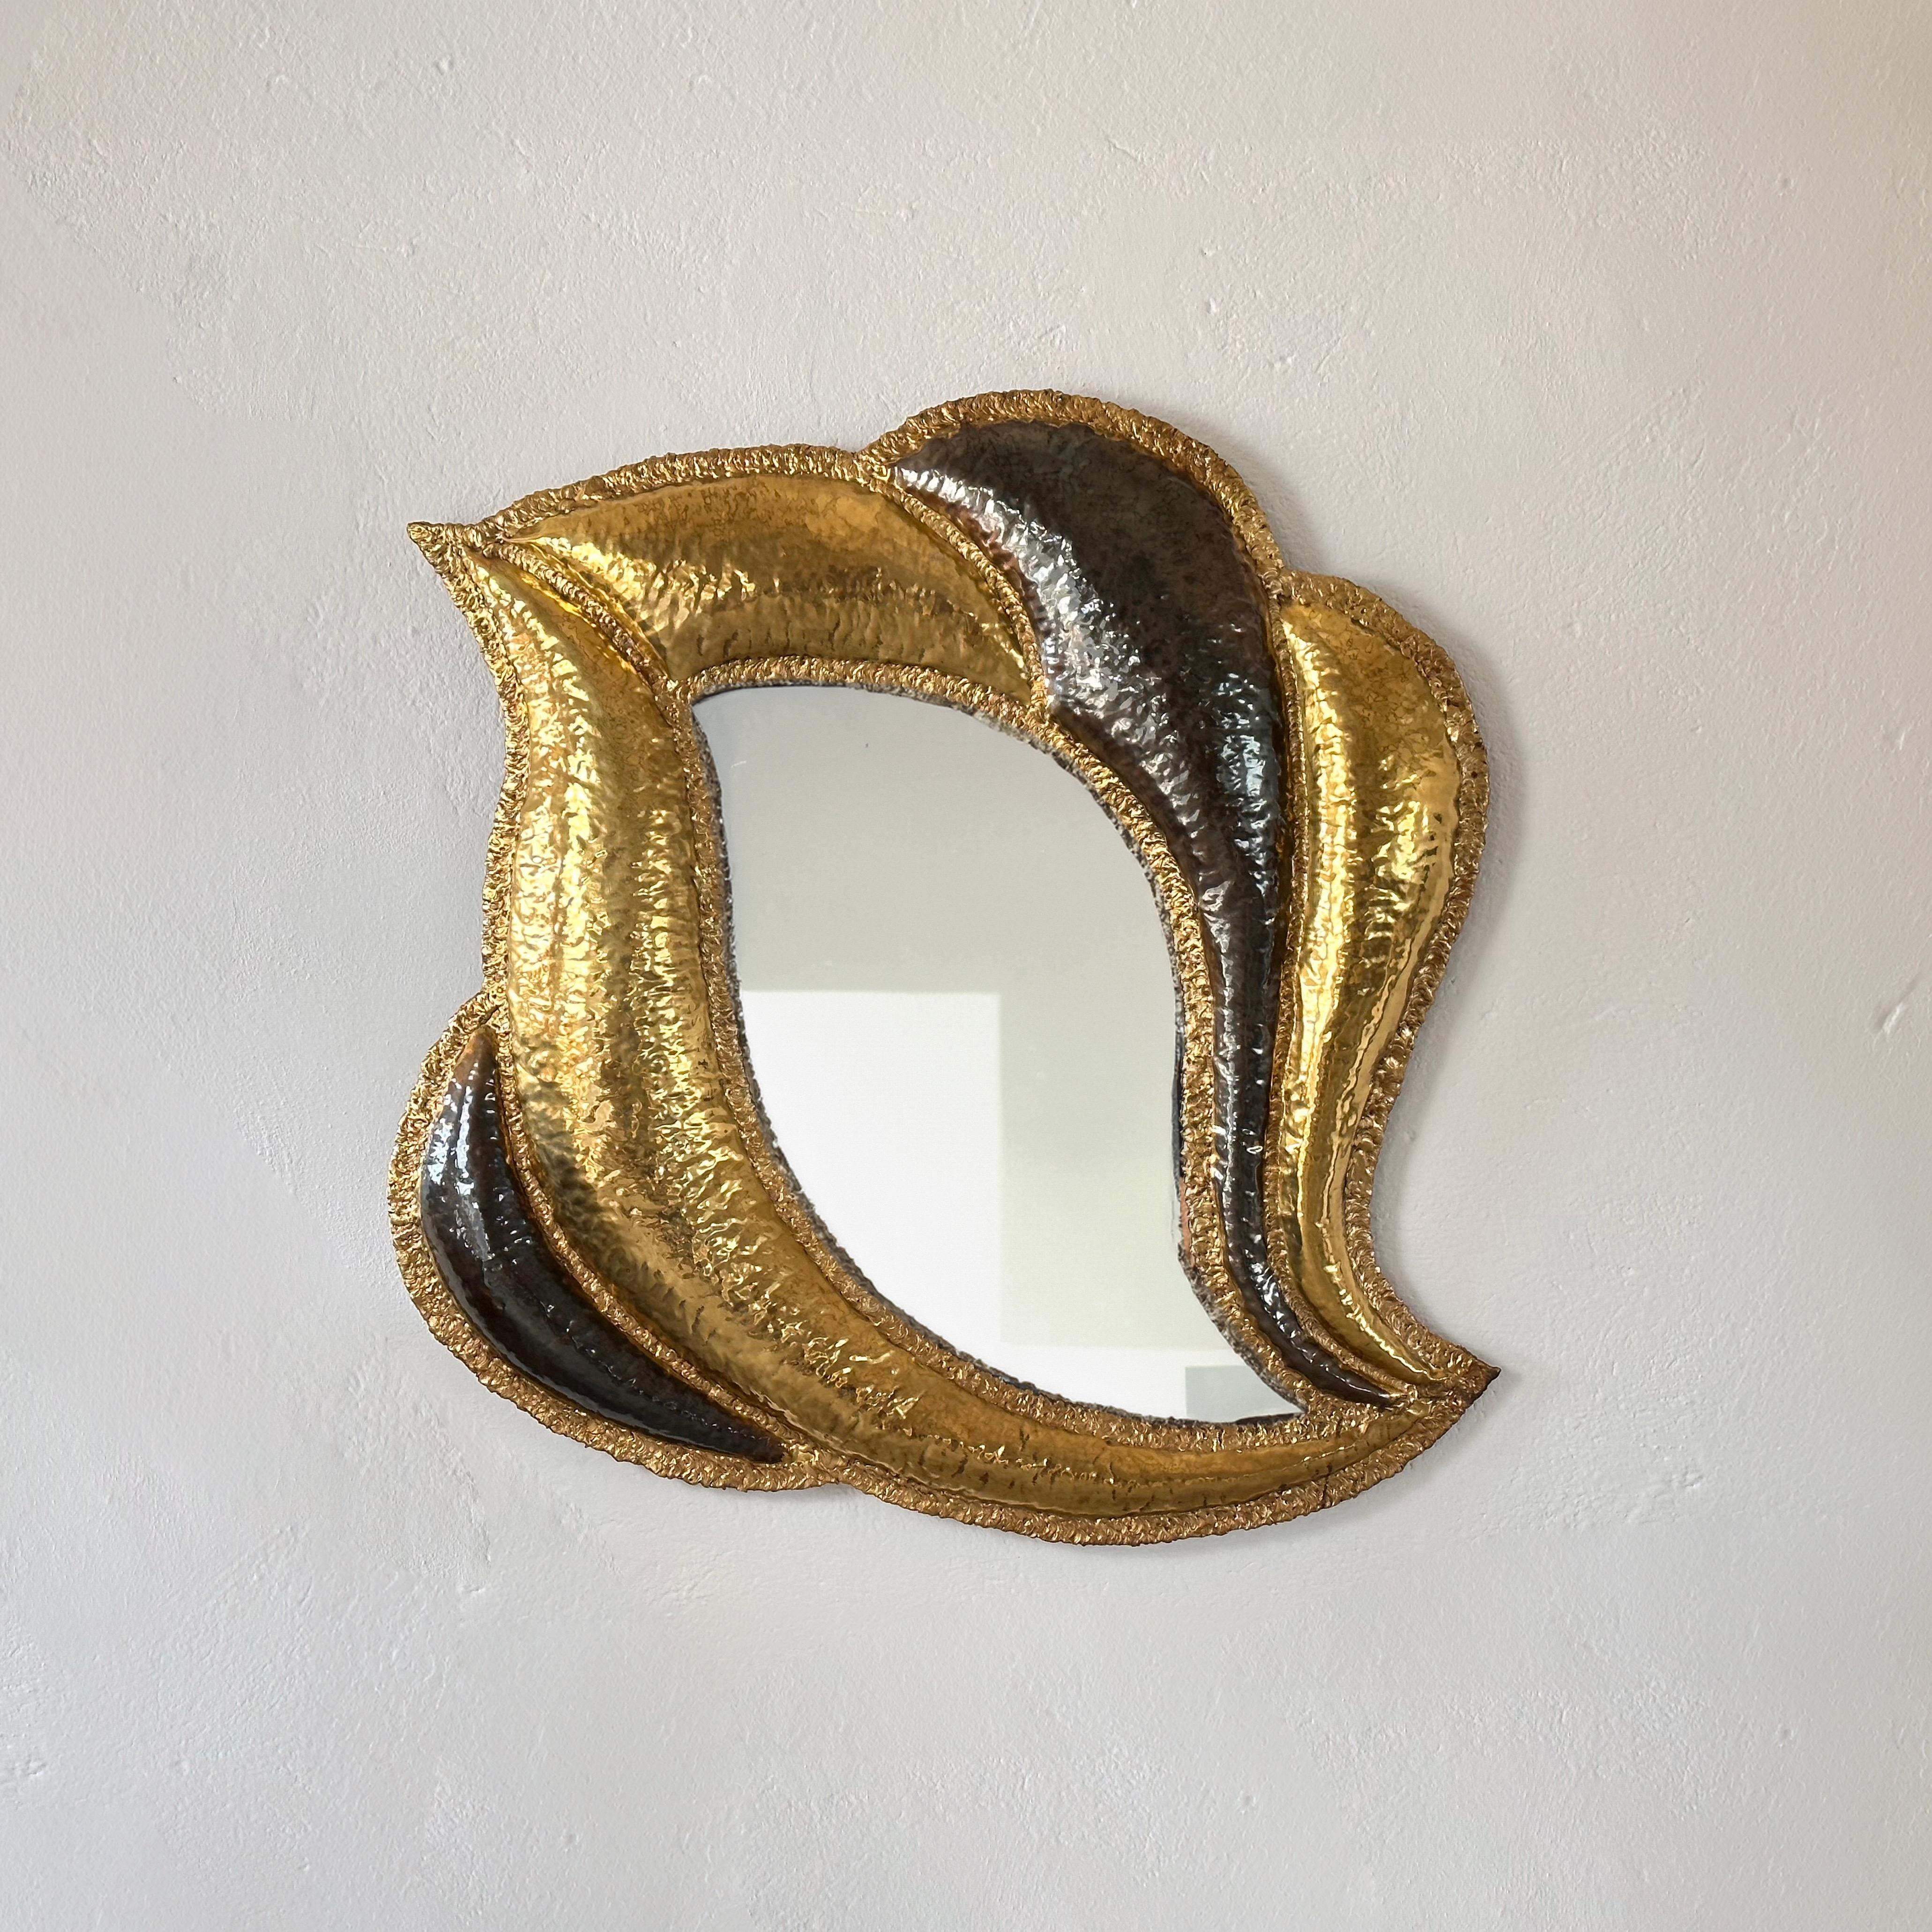 Elevate your interior with this stunning large hand-crafted brass mirror, designed by Henri Fernandez for Maison Honoré Paris in the 1970s and signed by the artist. This exceptional piece exudes elegance and sophistication, adding a touch of French